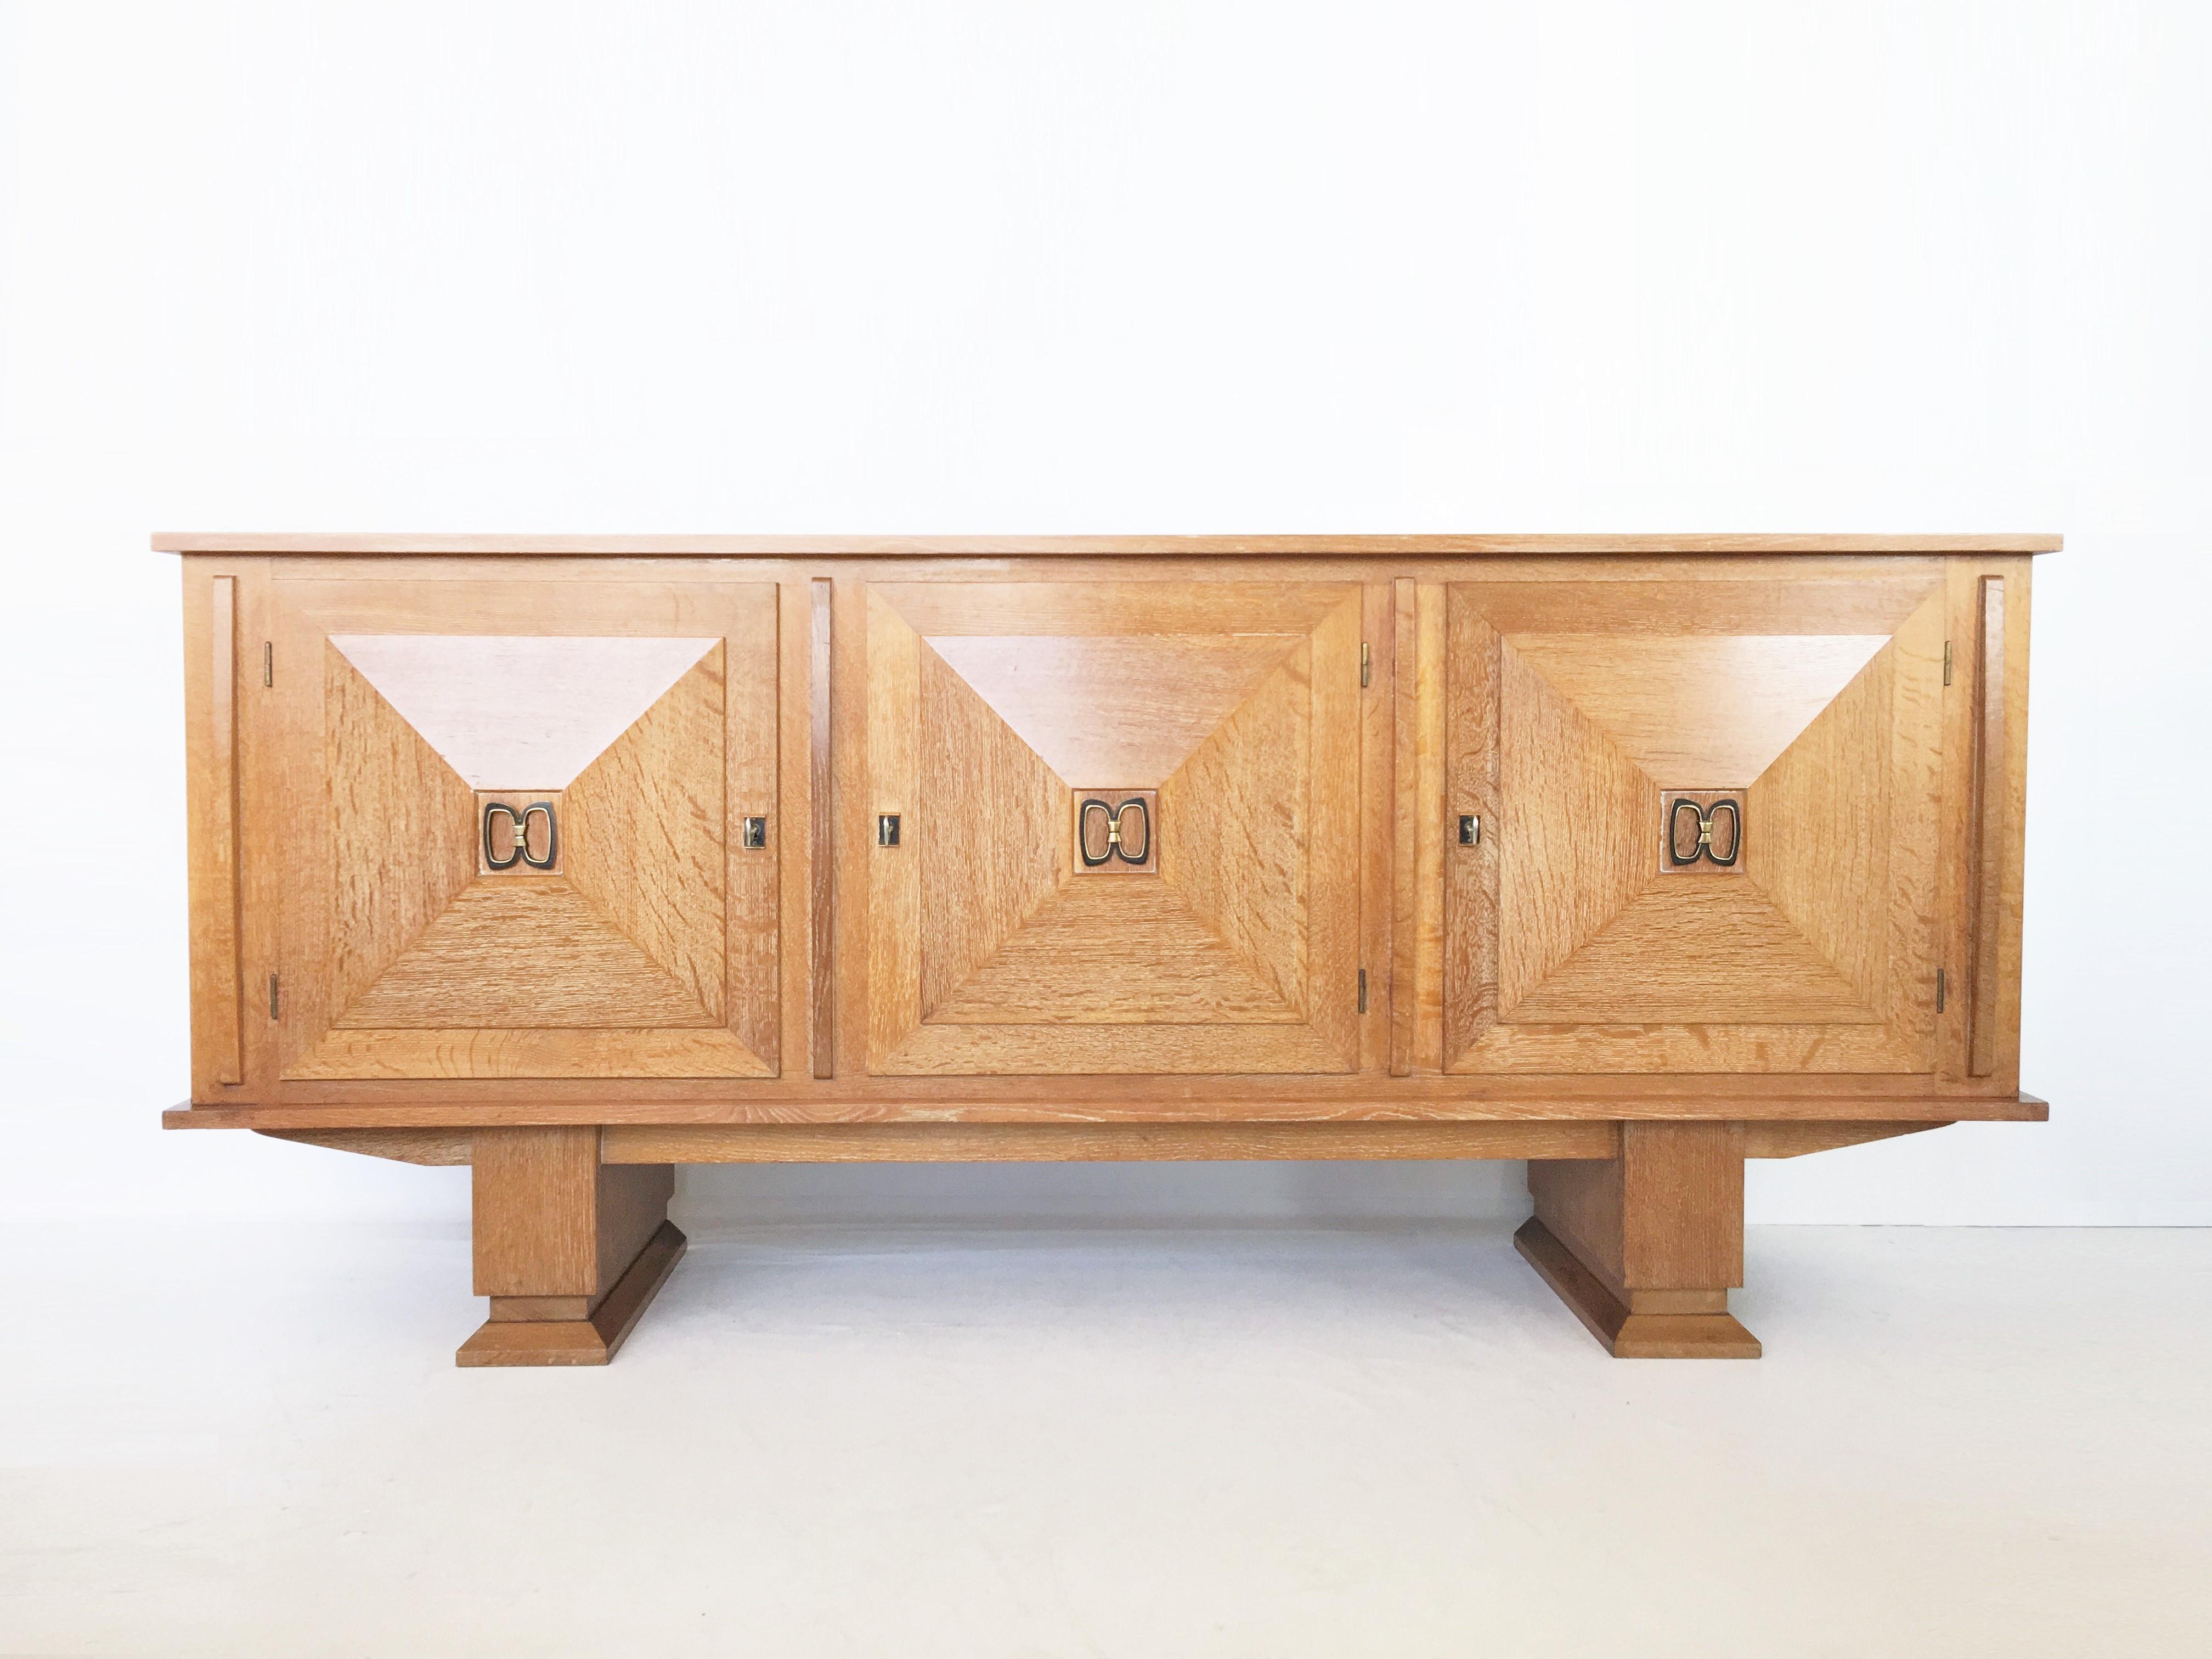 Very well crafted sideboard or buffet in oak, showing an overall white wash look with brass details. Three doors, all with beautifully designed wooden graphical patterns. The diagonal lines with added squares and a frame emphasize the